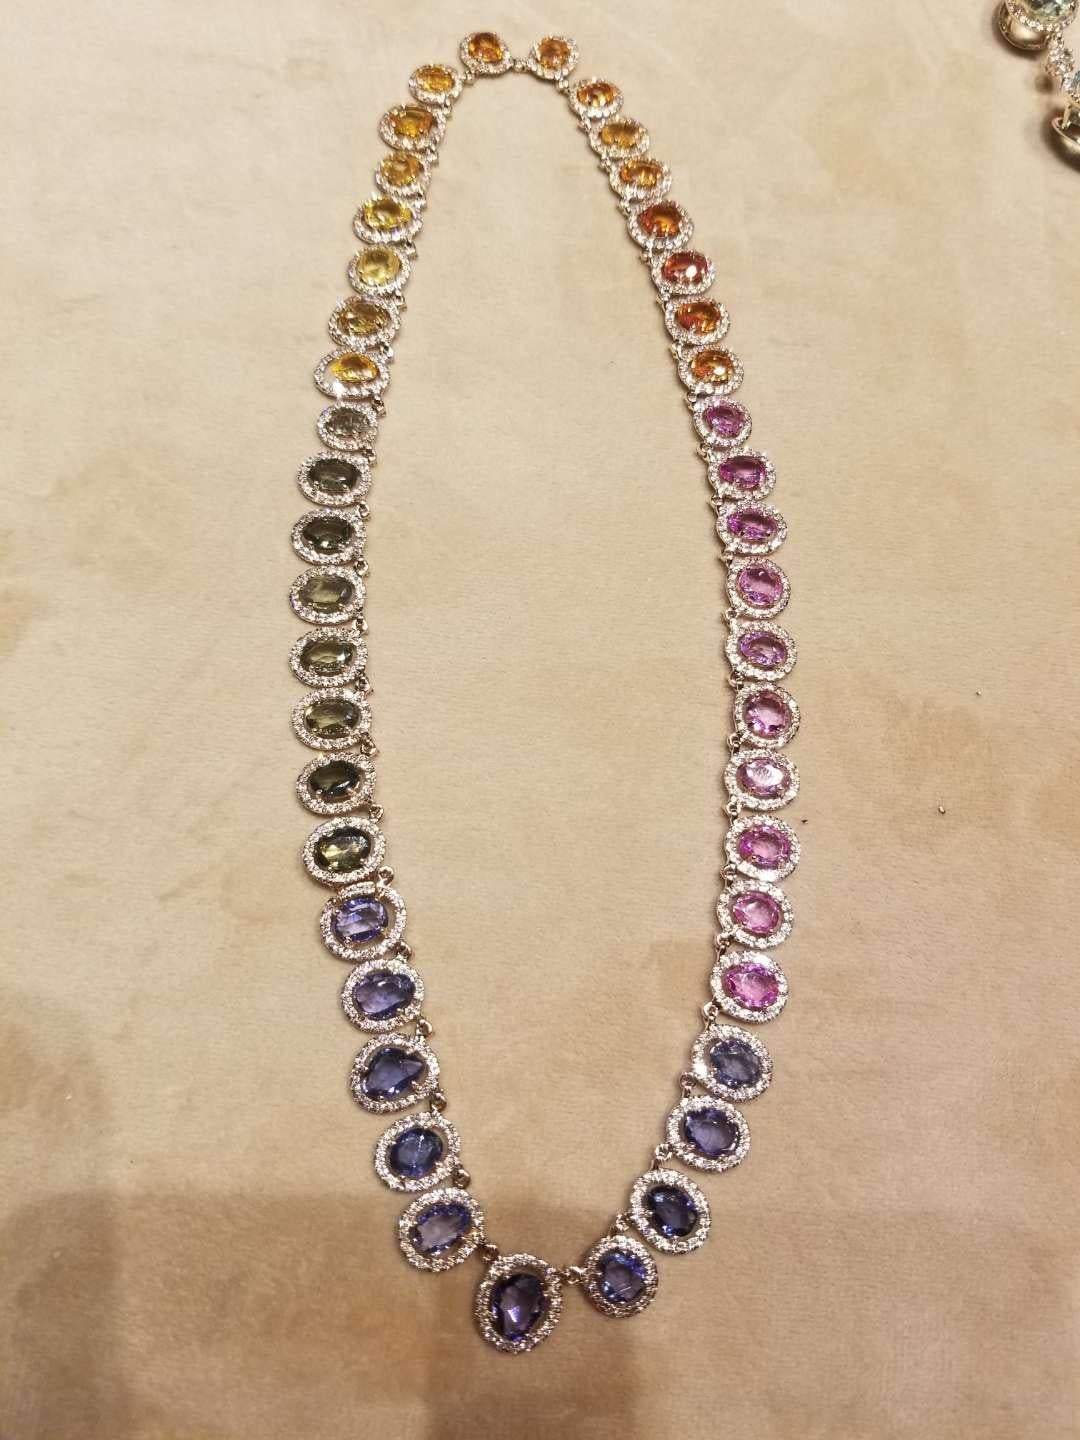 Rose Cut Set in 18 Karat Gold, Natural, Multi, Sapphire and Diamonds Chocker or Necklace